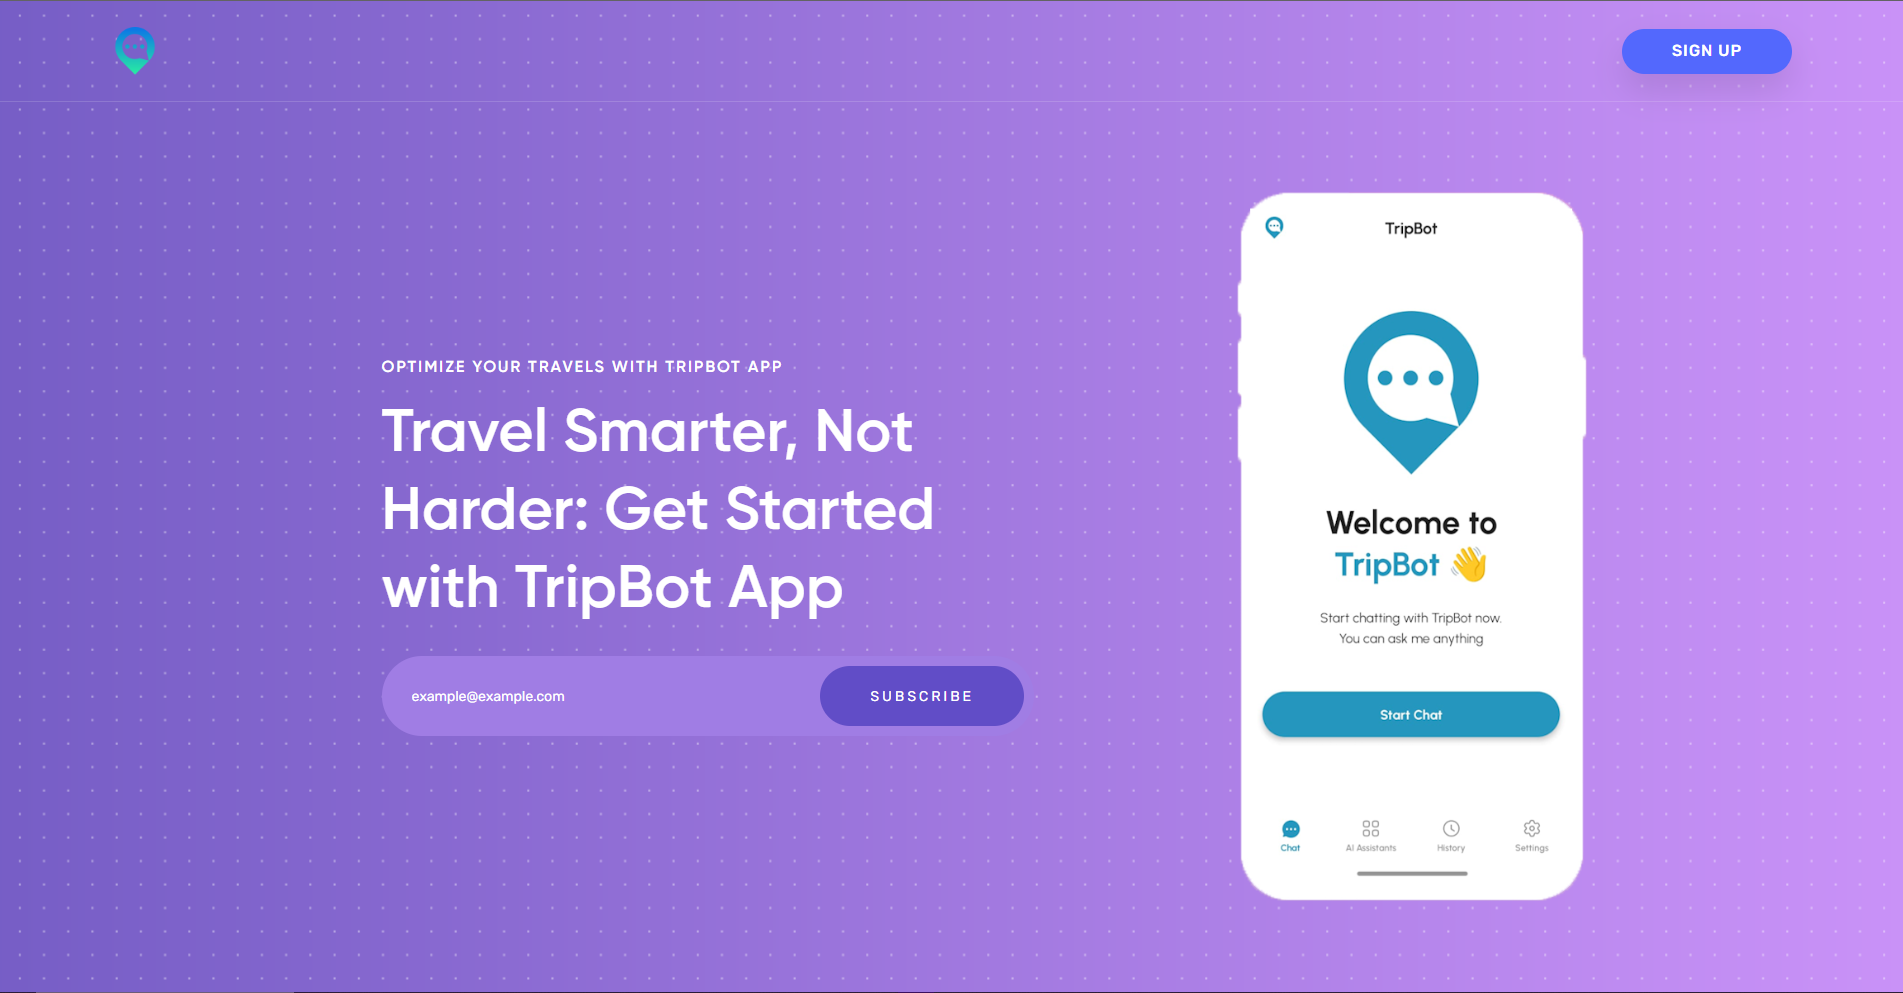 Travel Smart with Personalized AI Guidance